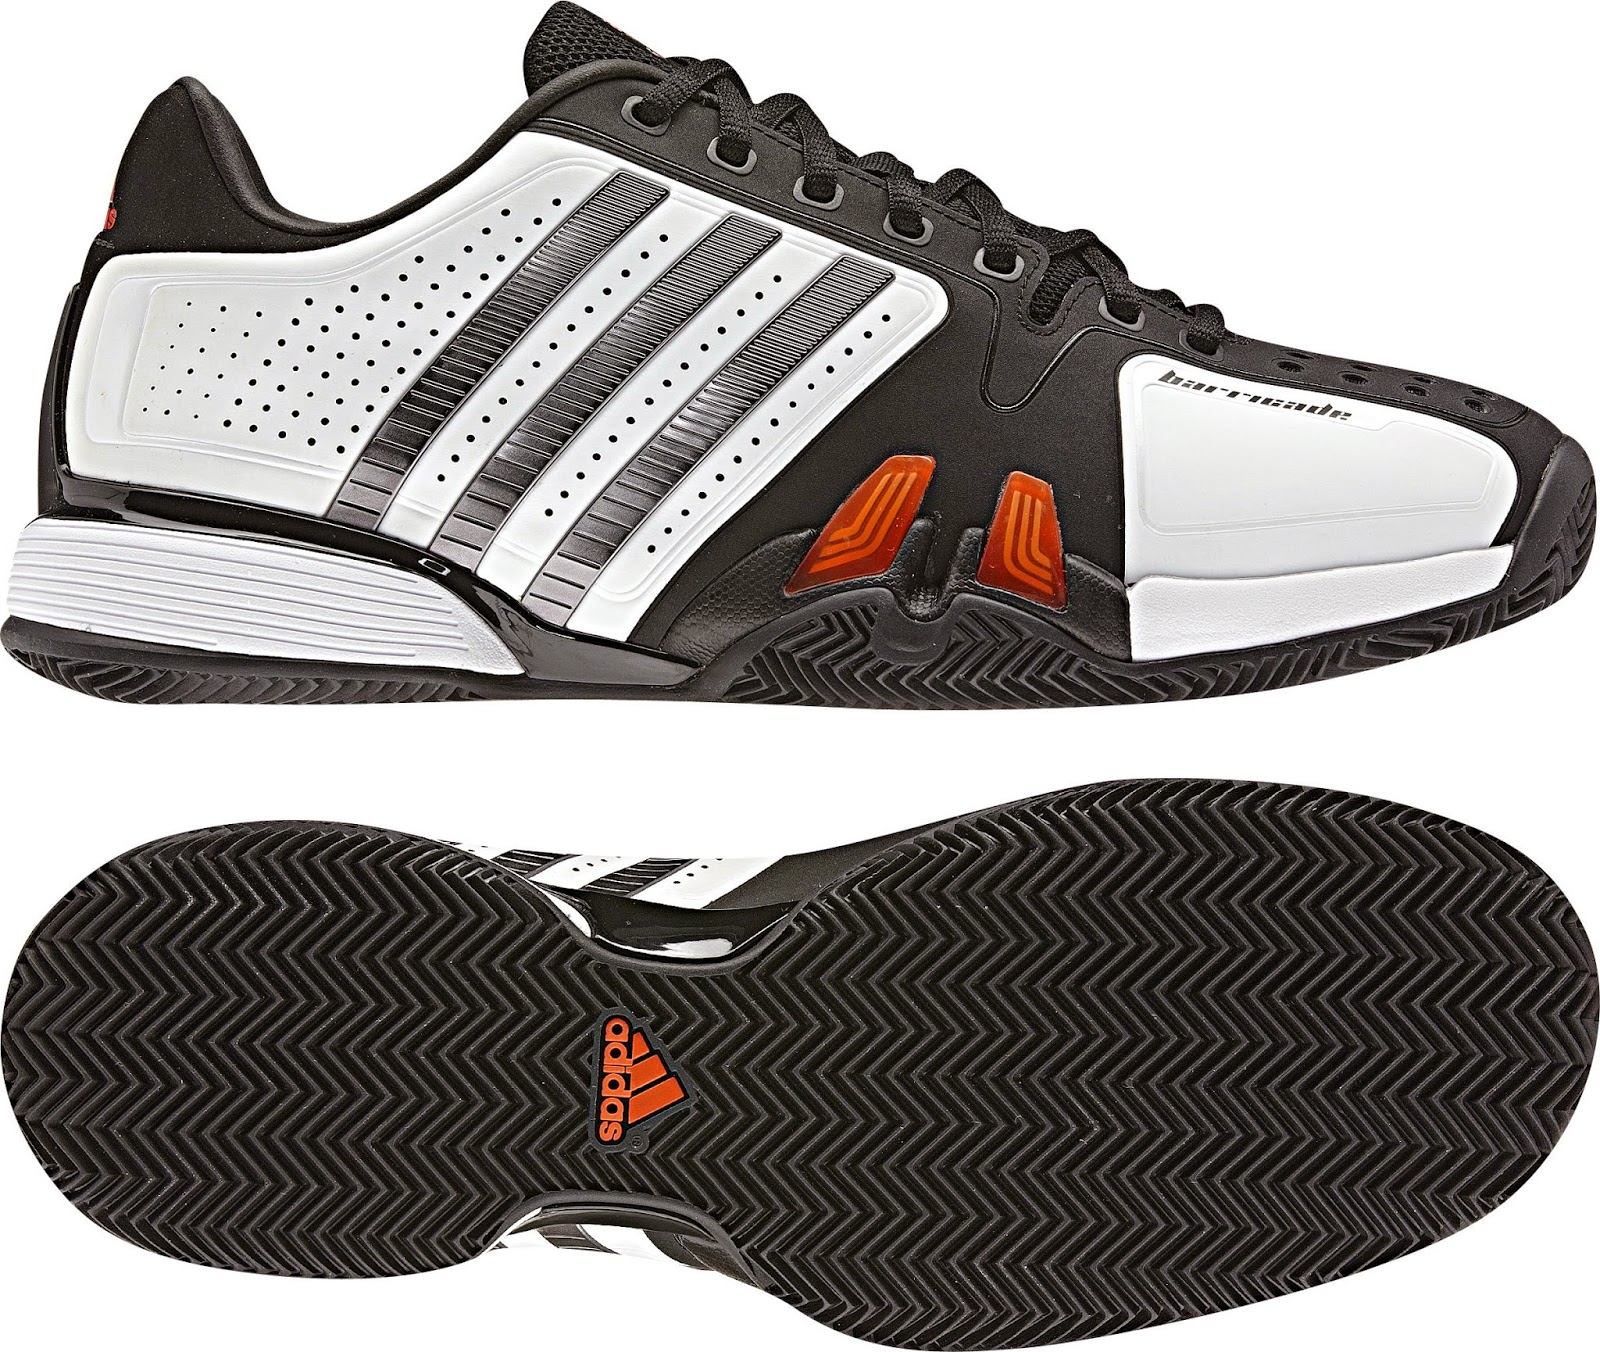 adidas shoes in 2015